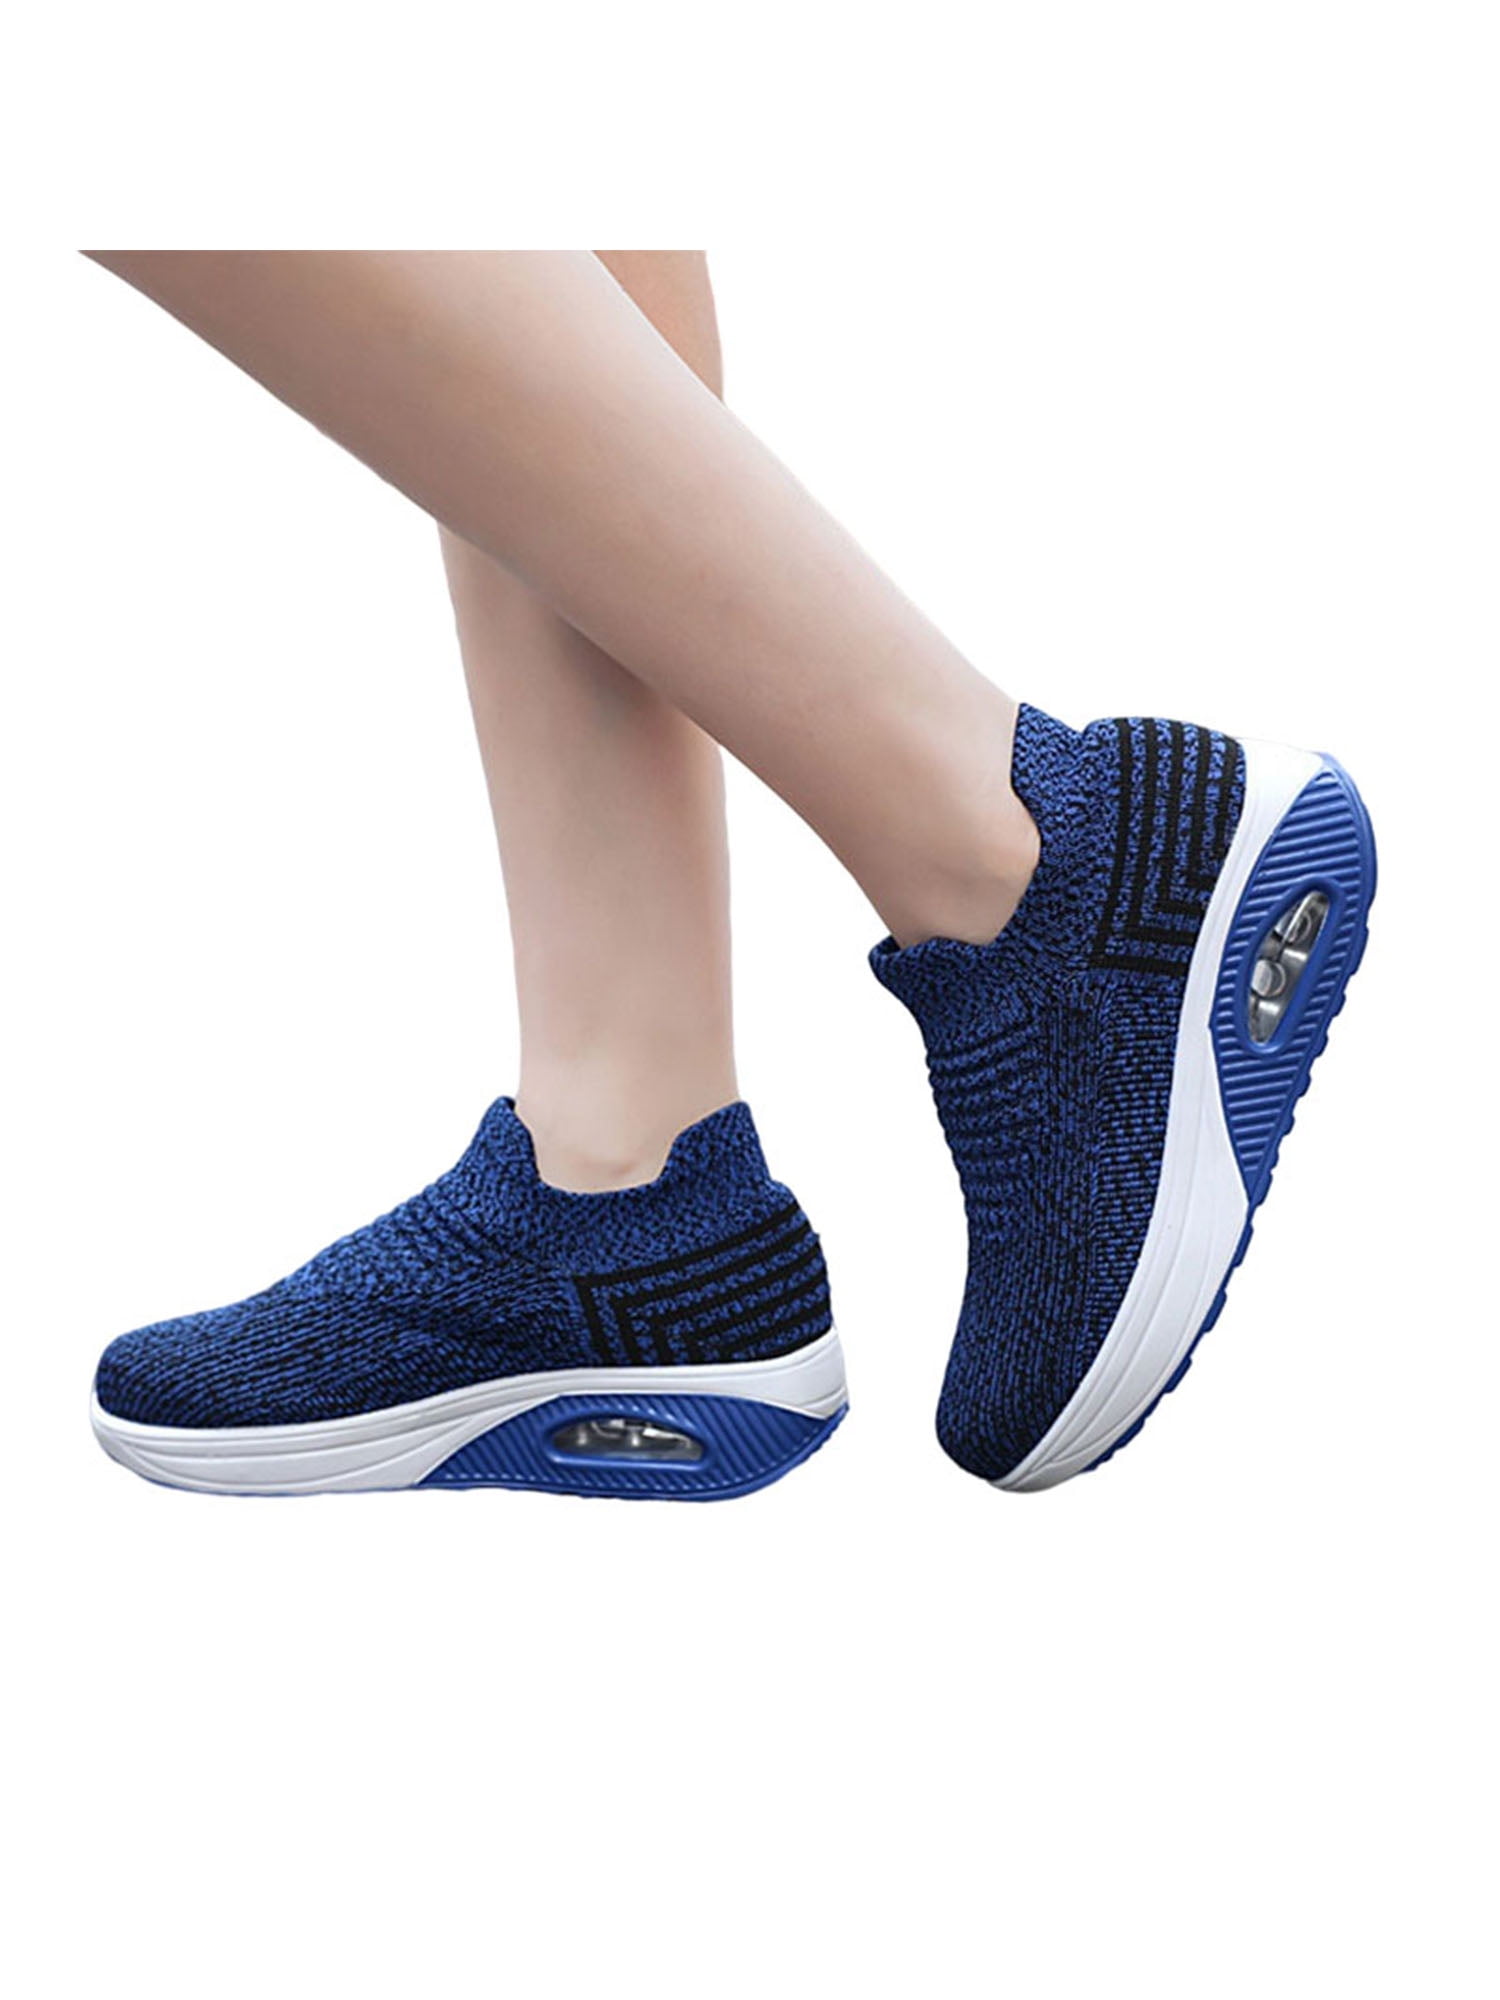 Women Fashion Air Cushion Sneakers Athletic Outdoor Slip-On Running Shoes Casual 